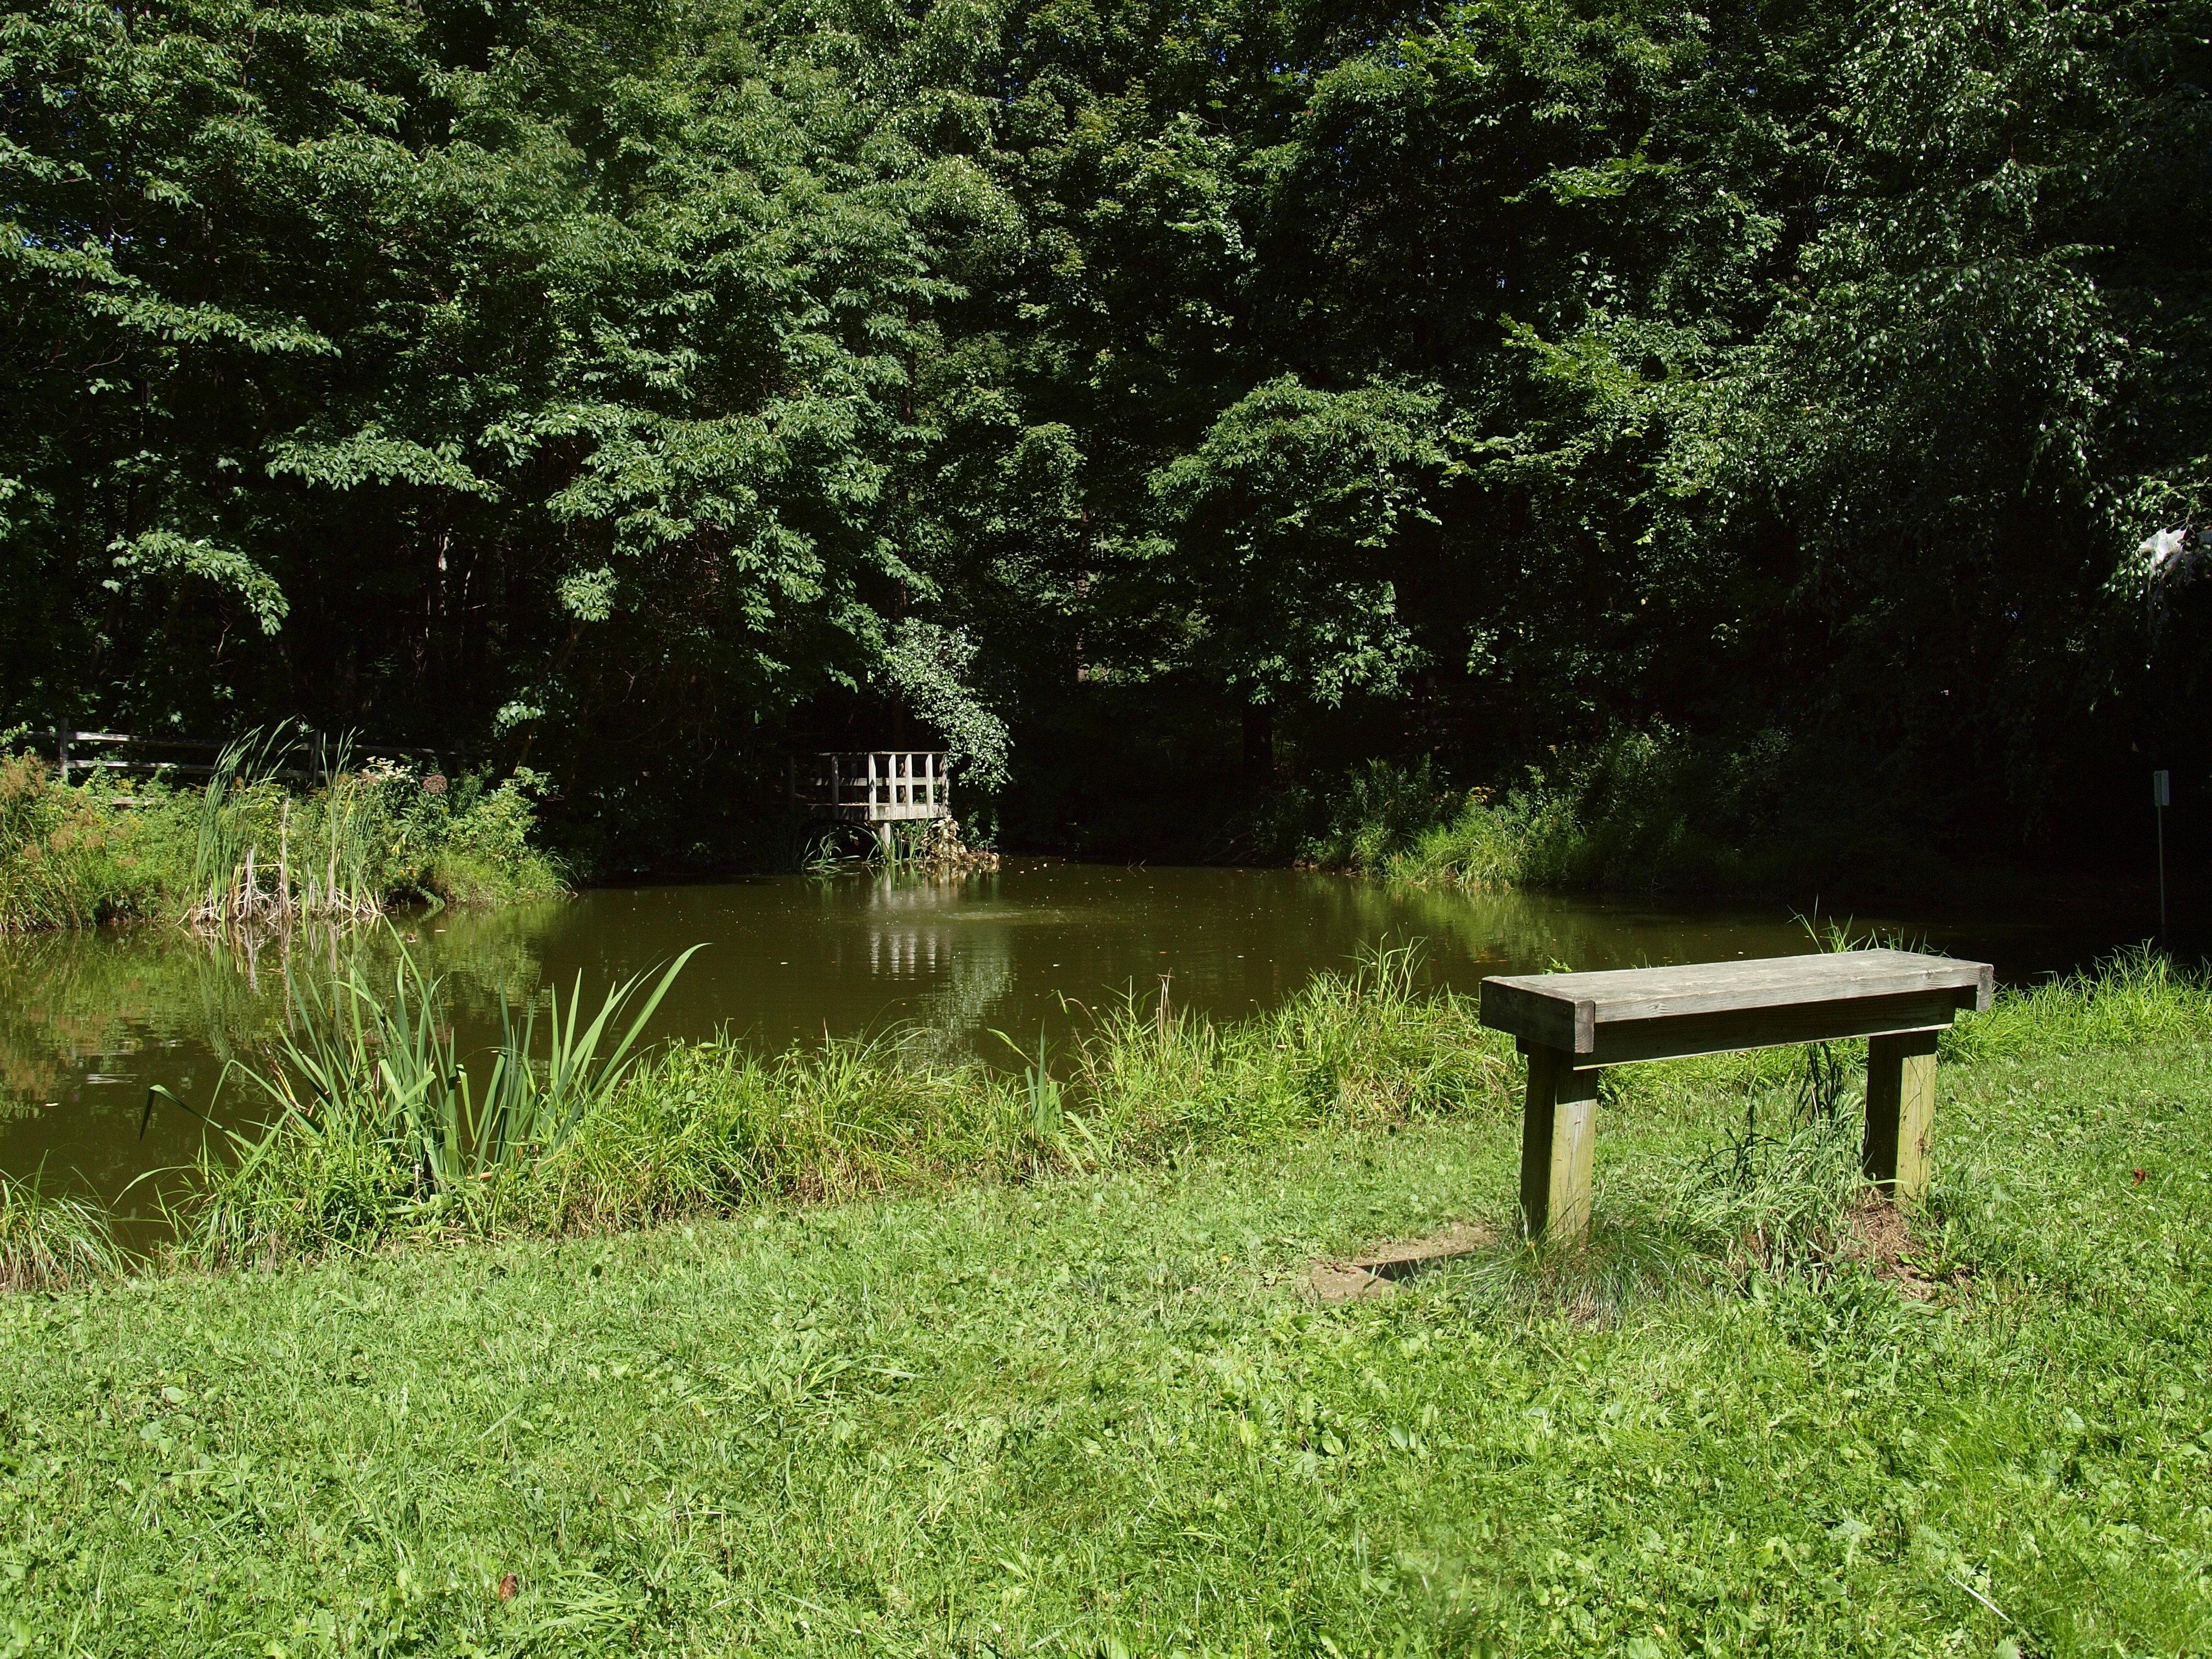 A bench in the grass overlooks a pond on the 自然中心 property